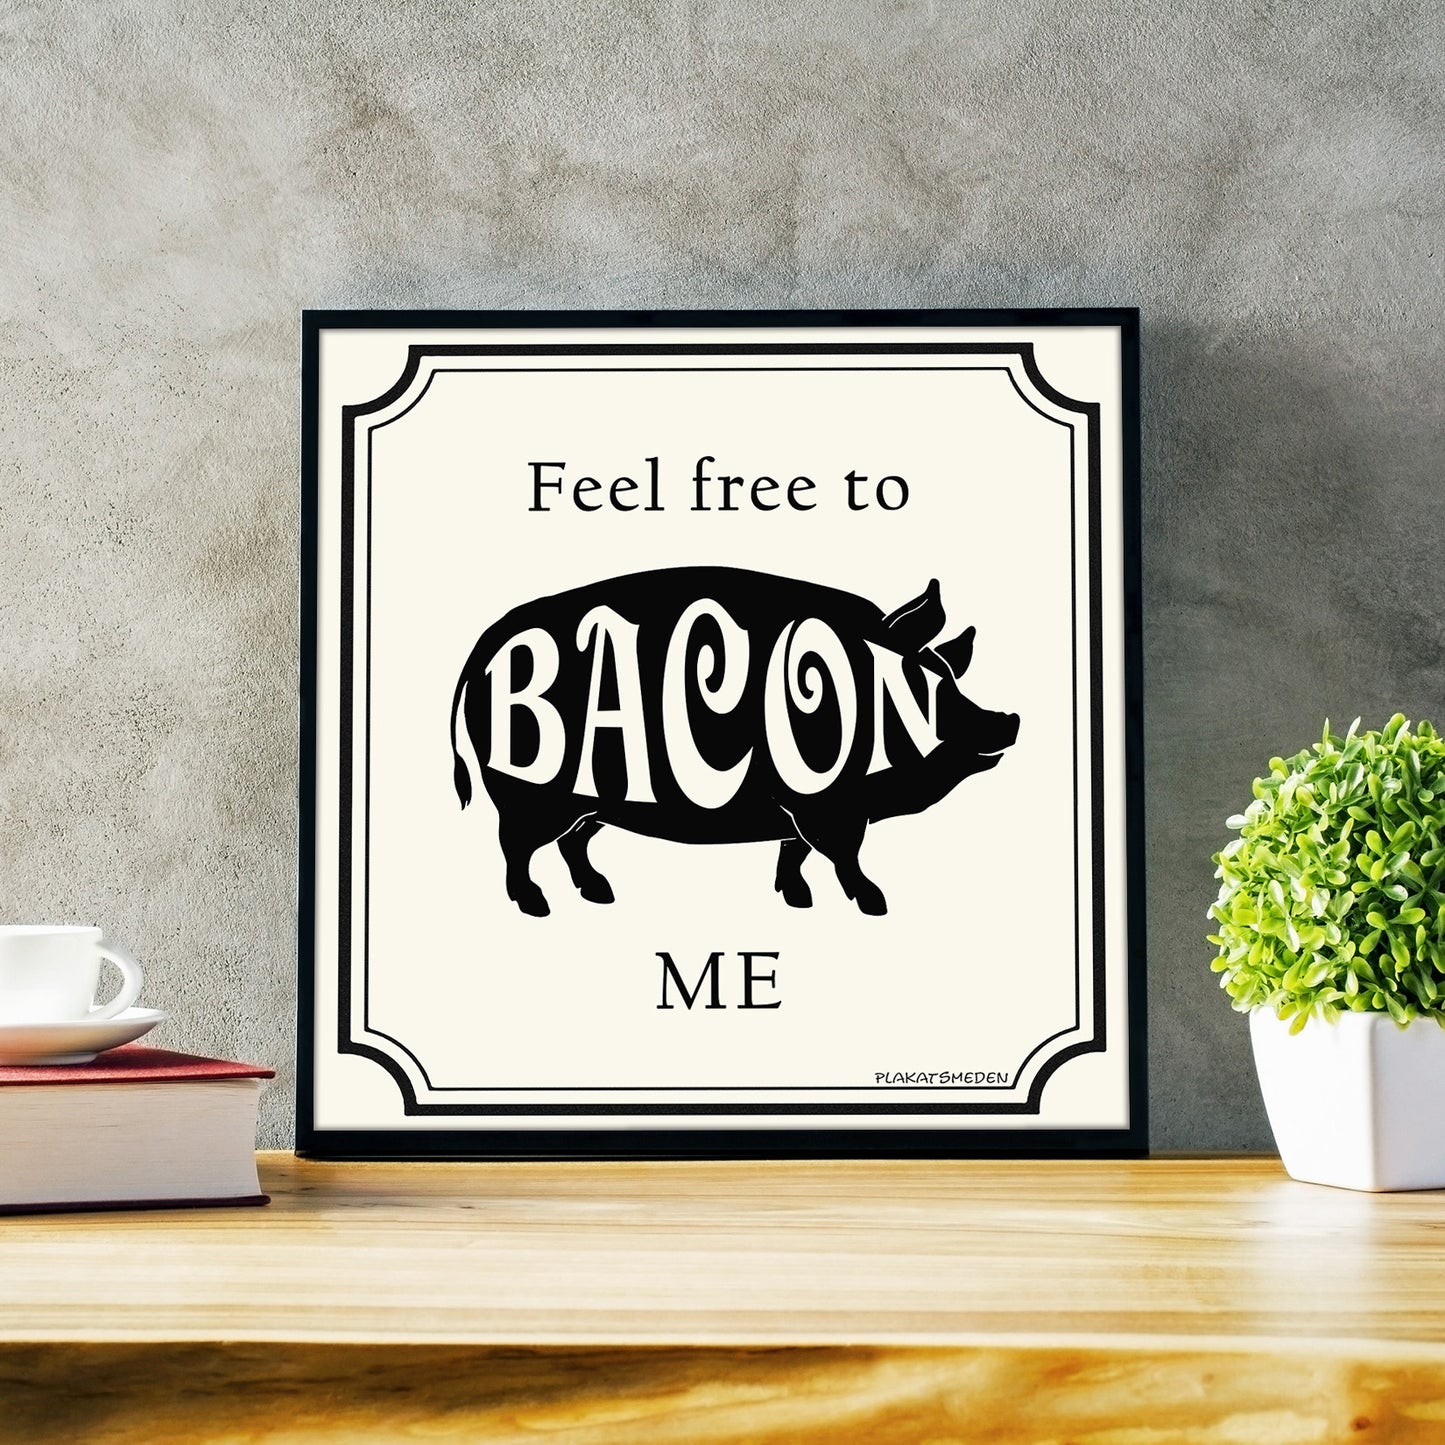 Feel free to BACON me